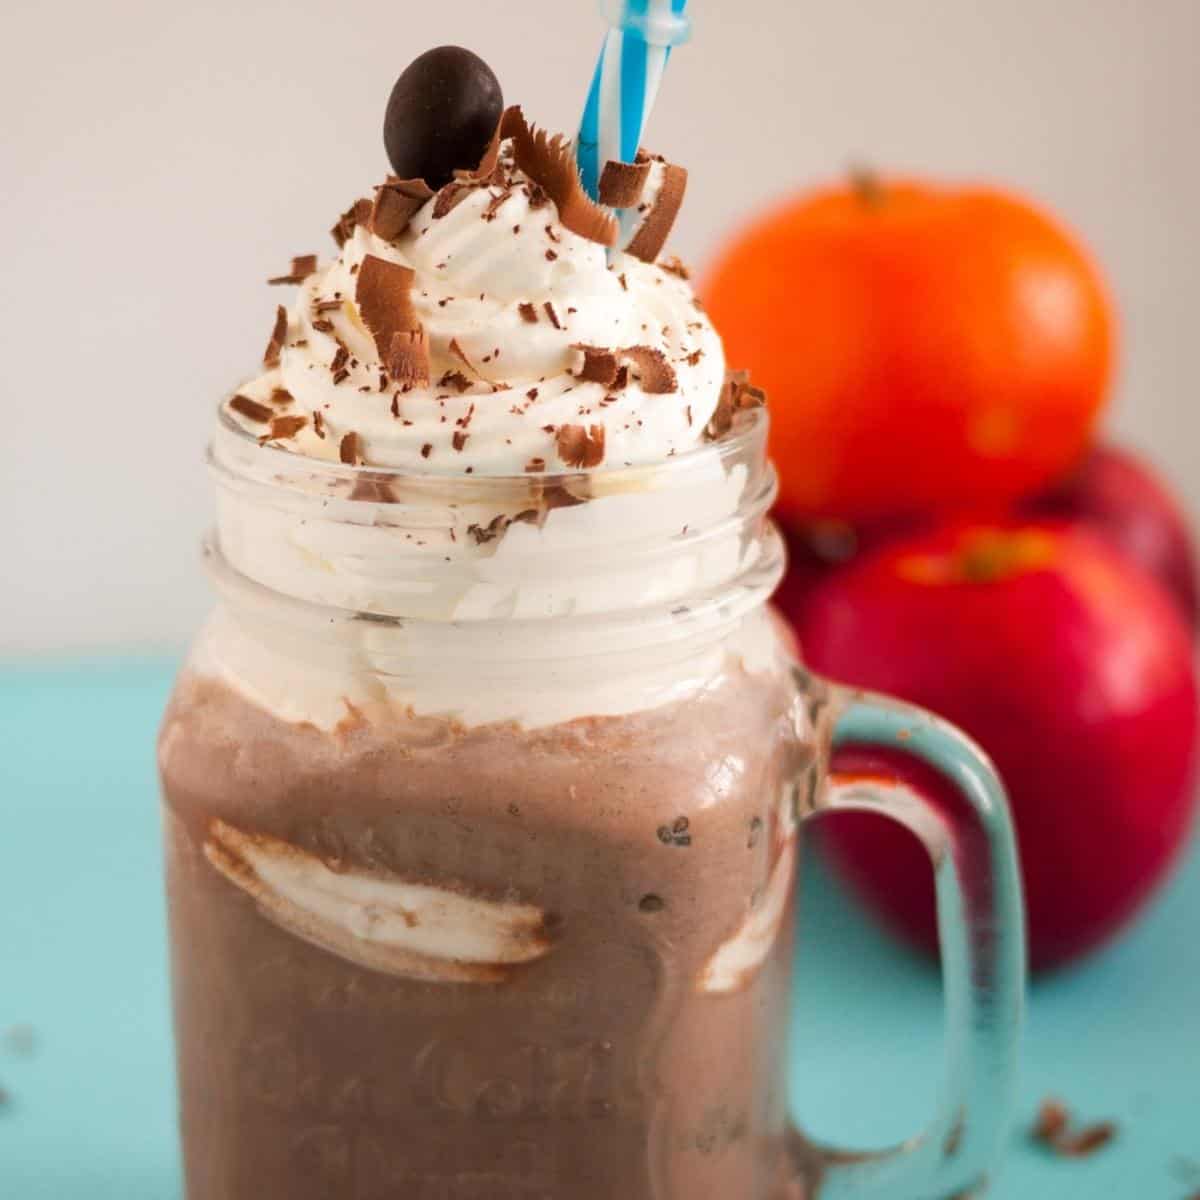 Chocolate drink topped with whipped cream.